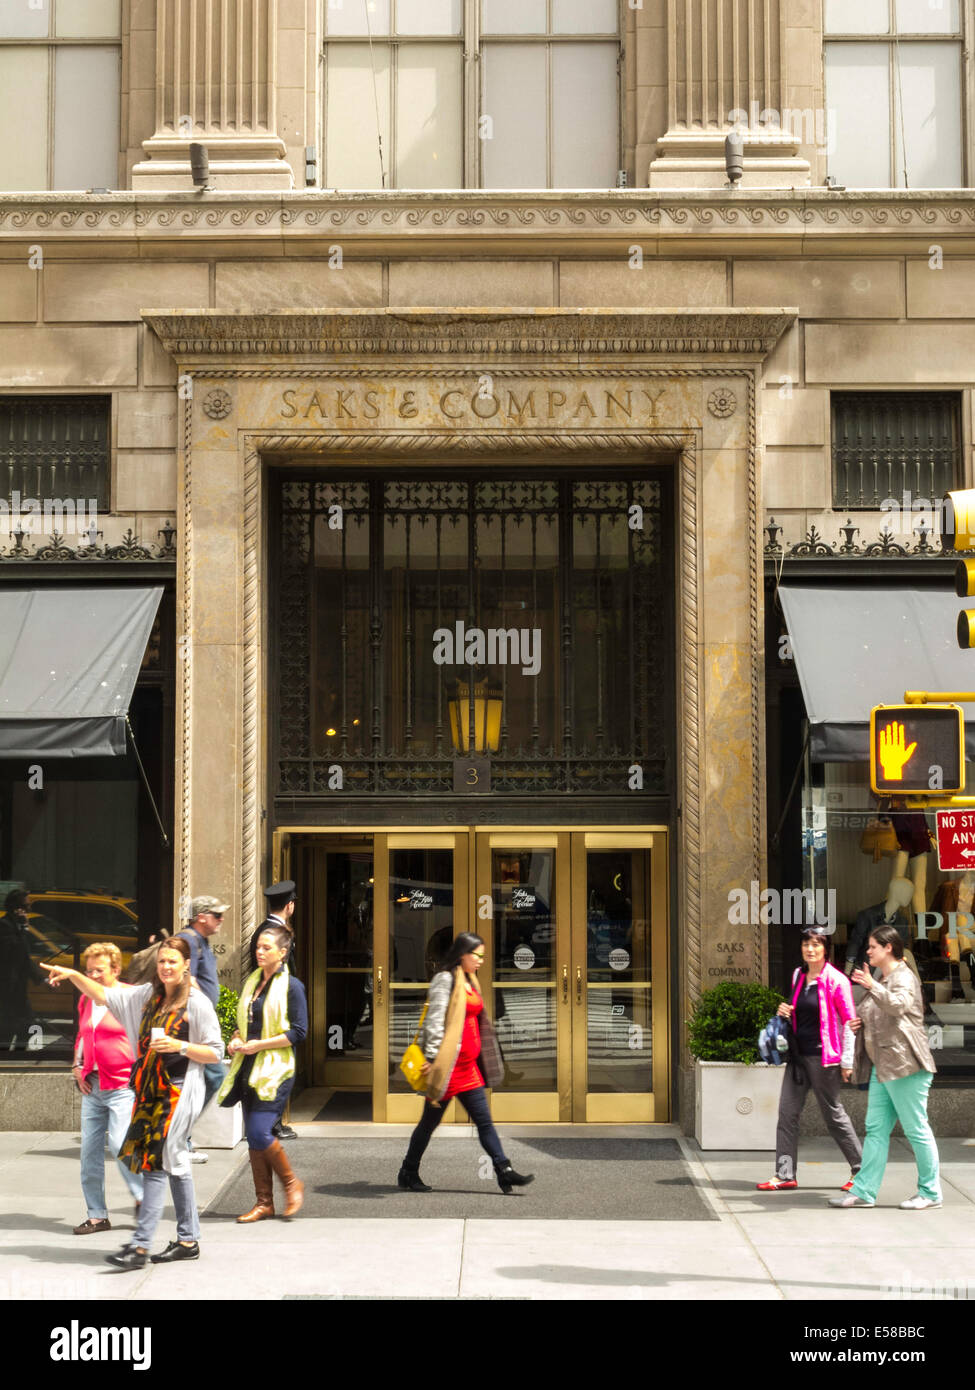 Saks Fifth Avenue Storefront, NYC Foto Stock